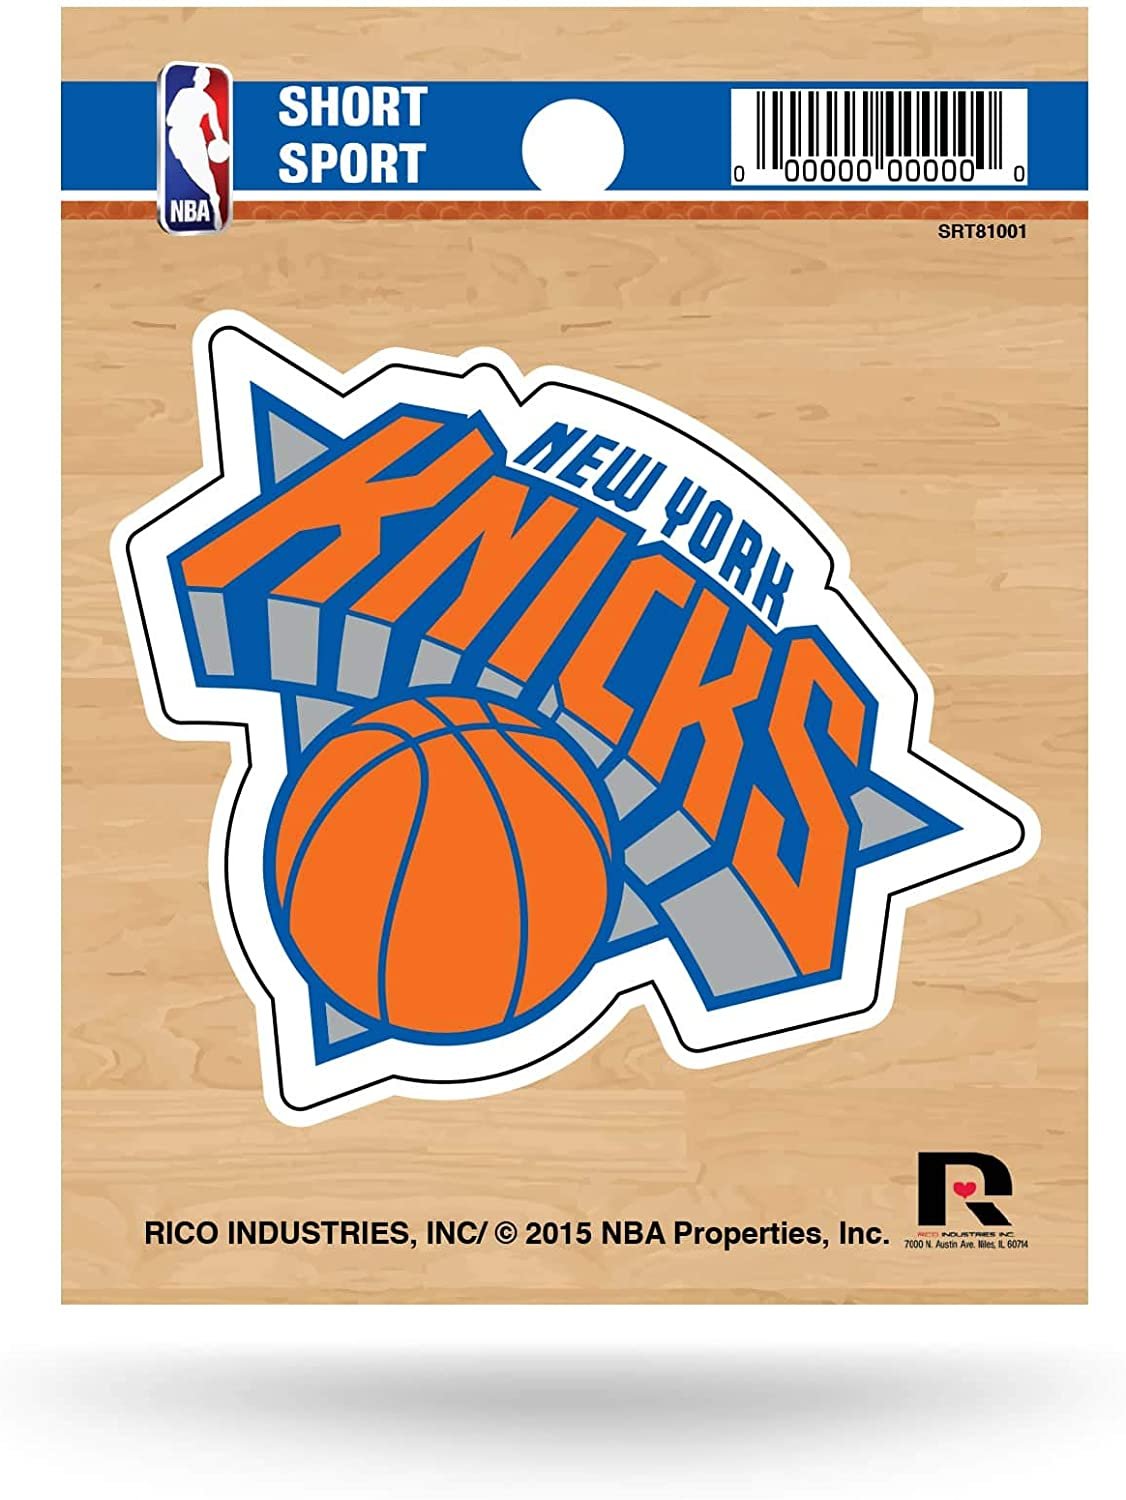 New York Knicks 3 Inch Sticker Decal, Die Cut, Full Adhesive Backing, Easy Peel and Stick Application